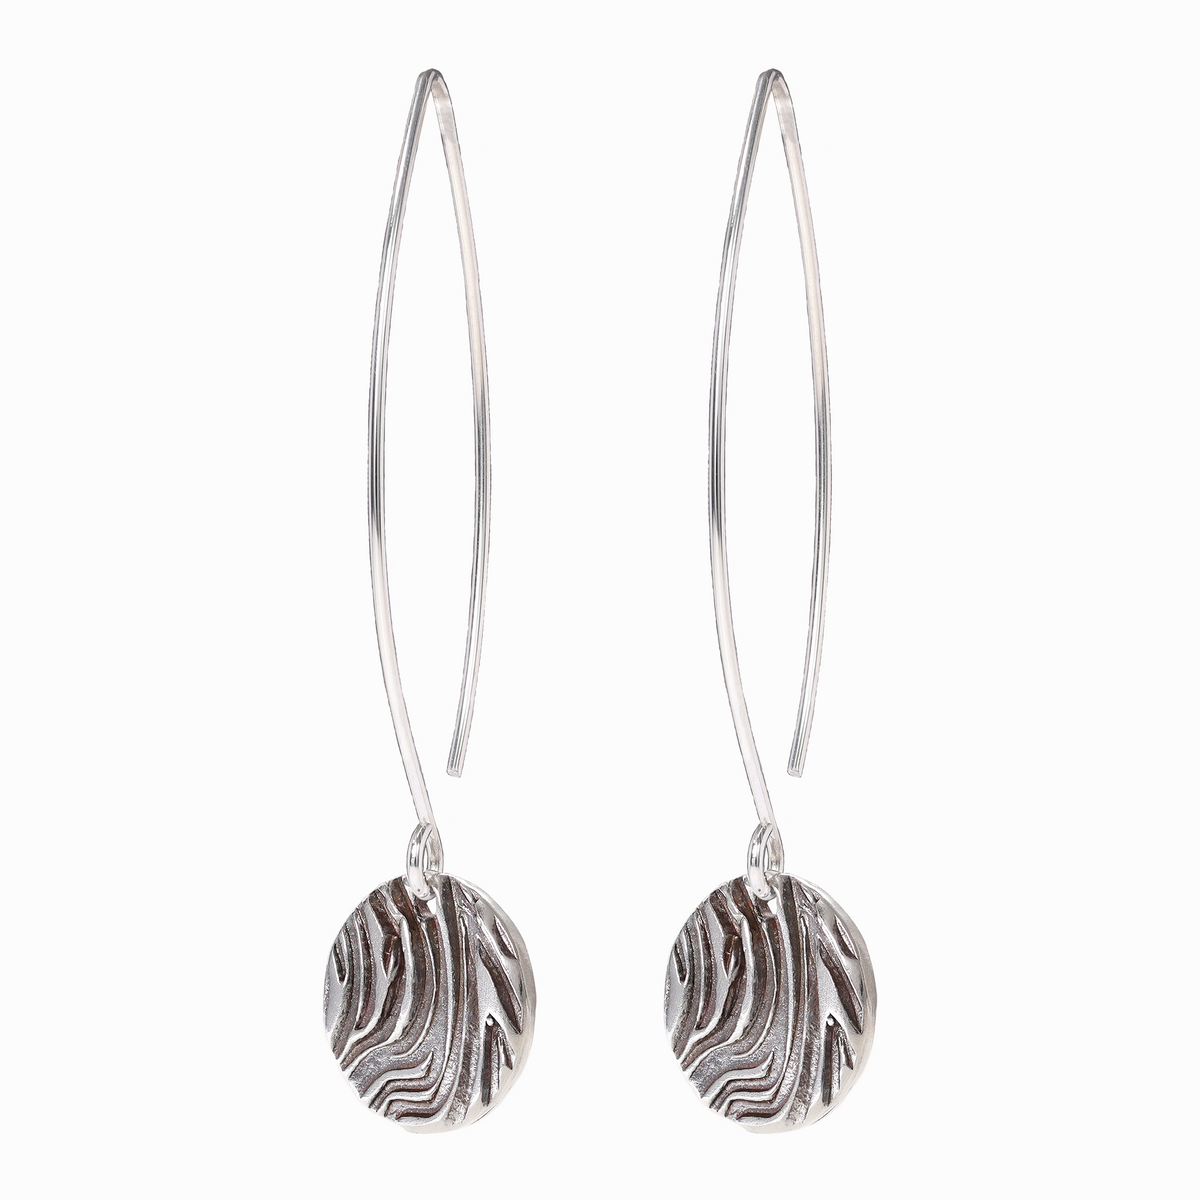 Wind Textured Small Sterling Silver Earrings on Long Ear Wires